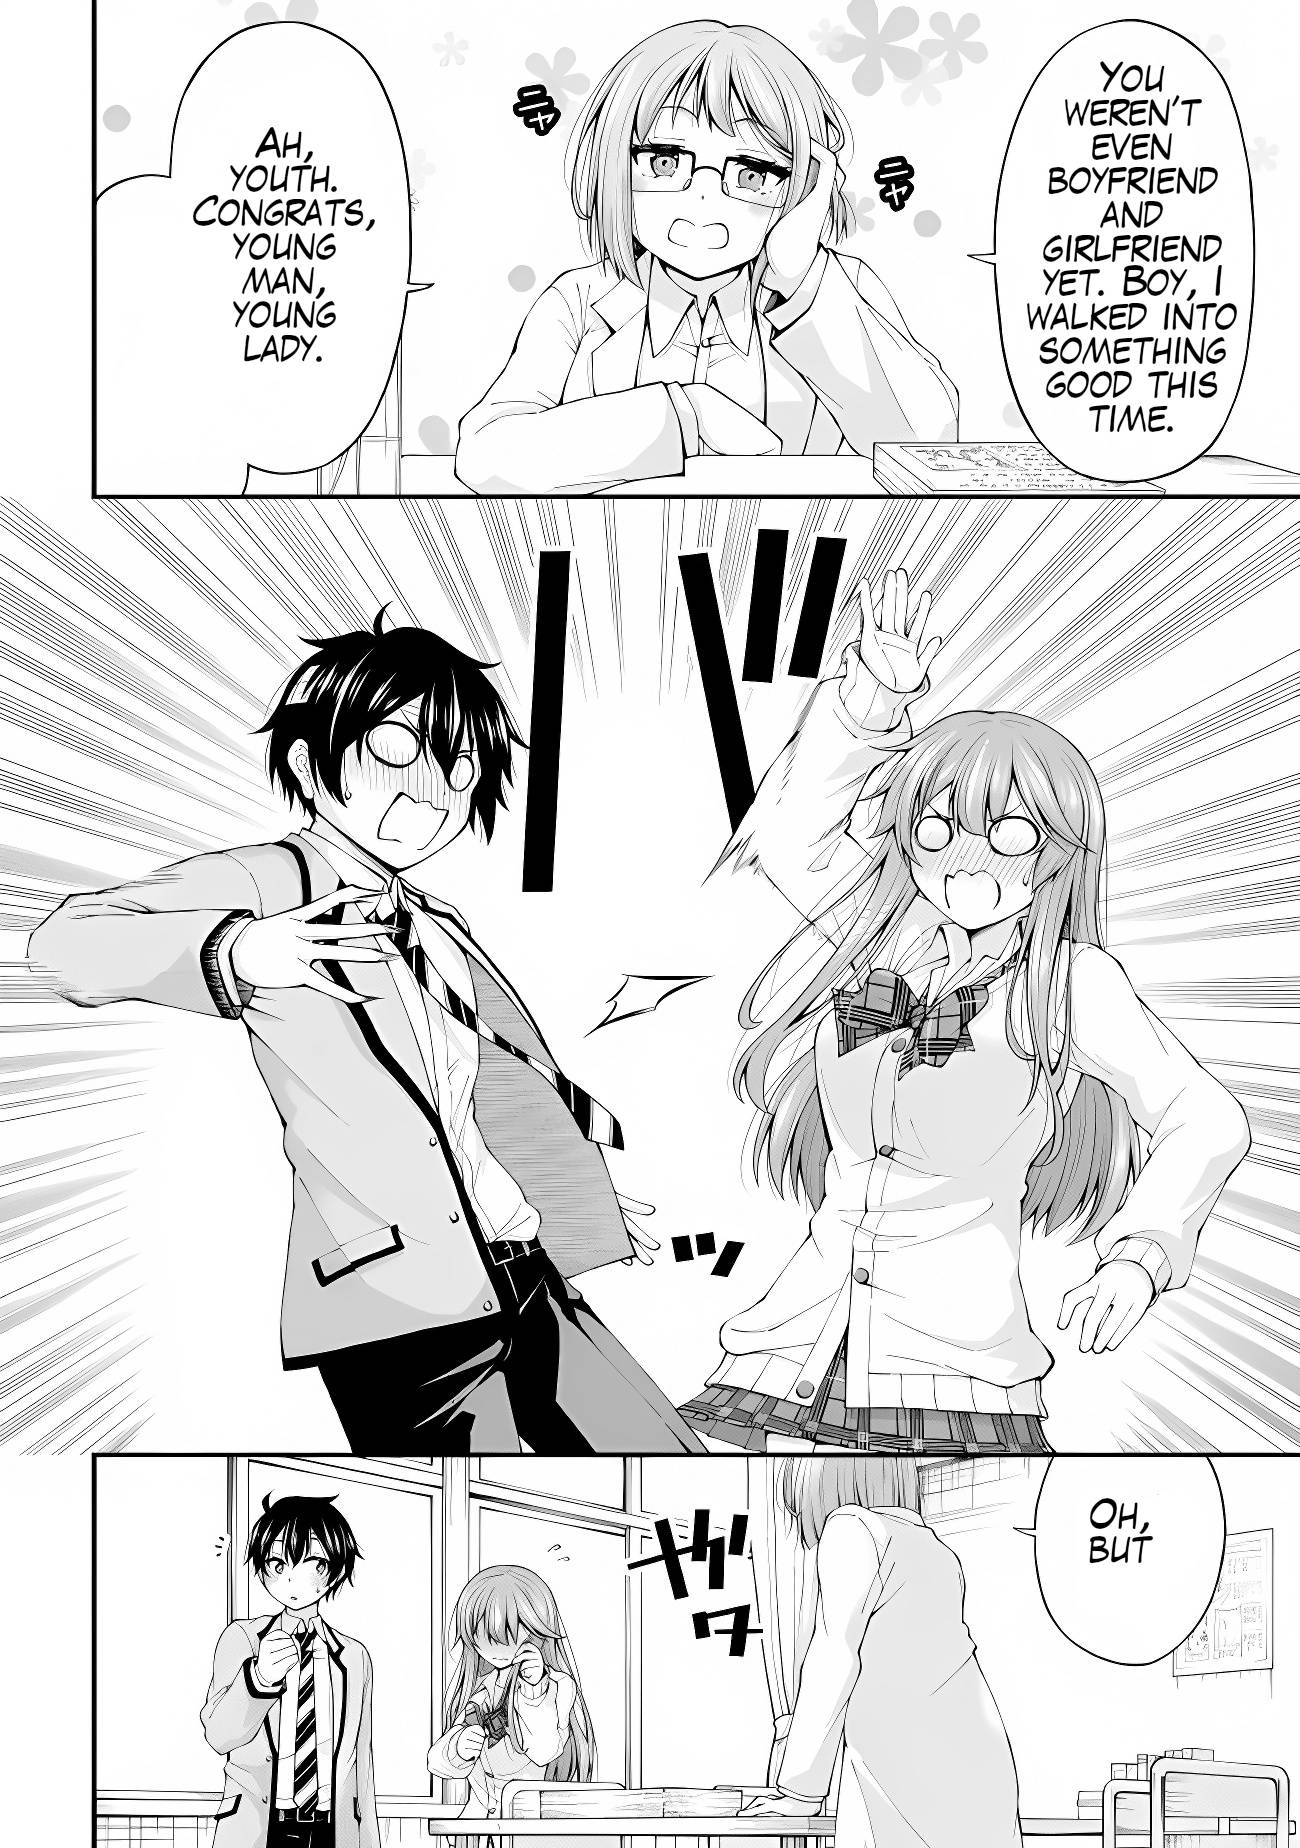 The Gal Who Was Meant to Confess to Me as a Game Punishment - chapter 2 - #2